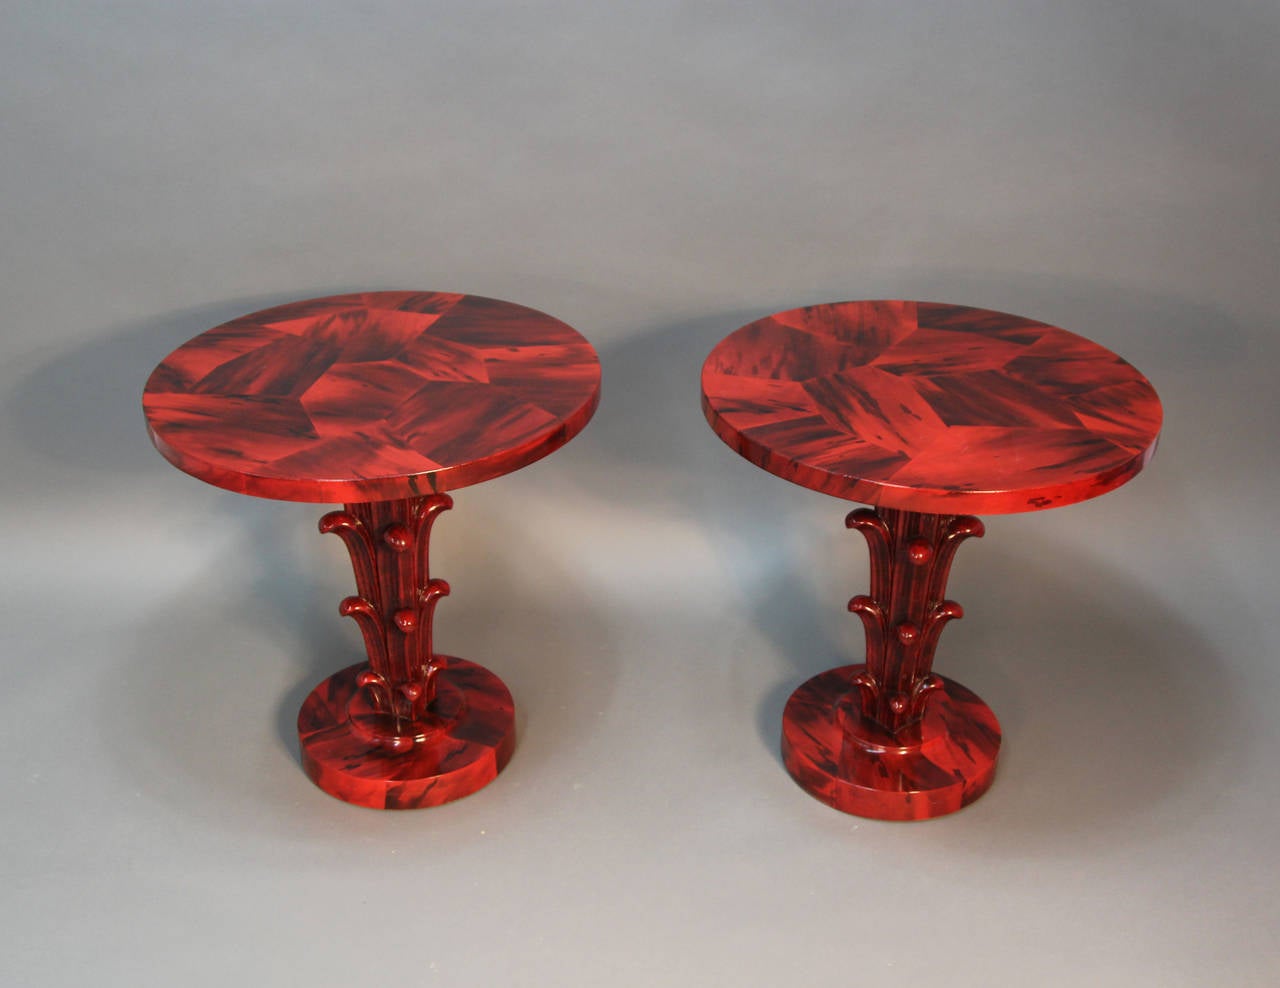 Faux red tortoiseshell lacquer tables.  Very unusual and elegant design.